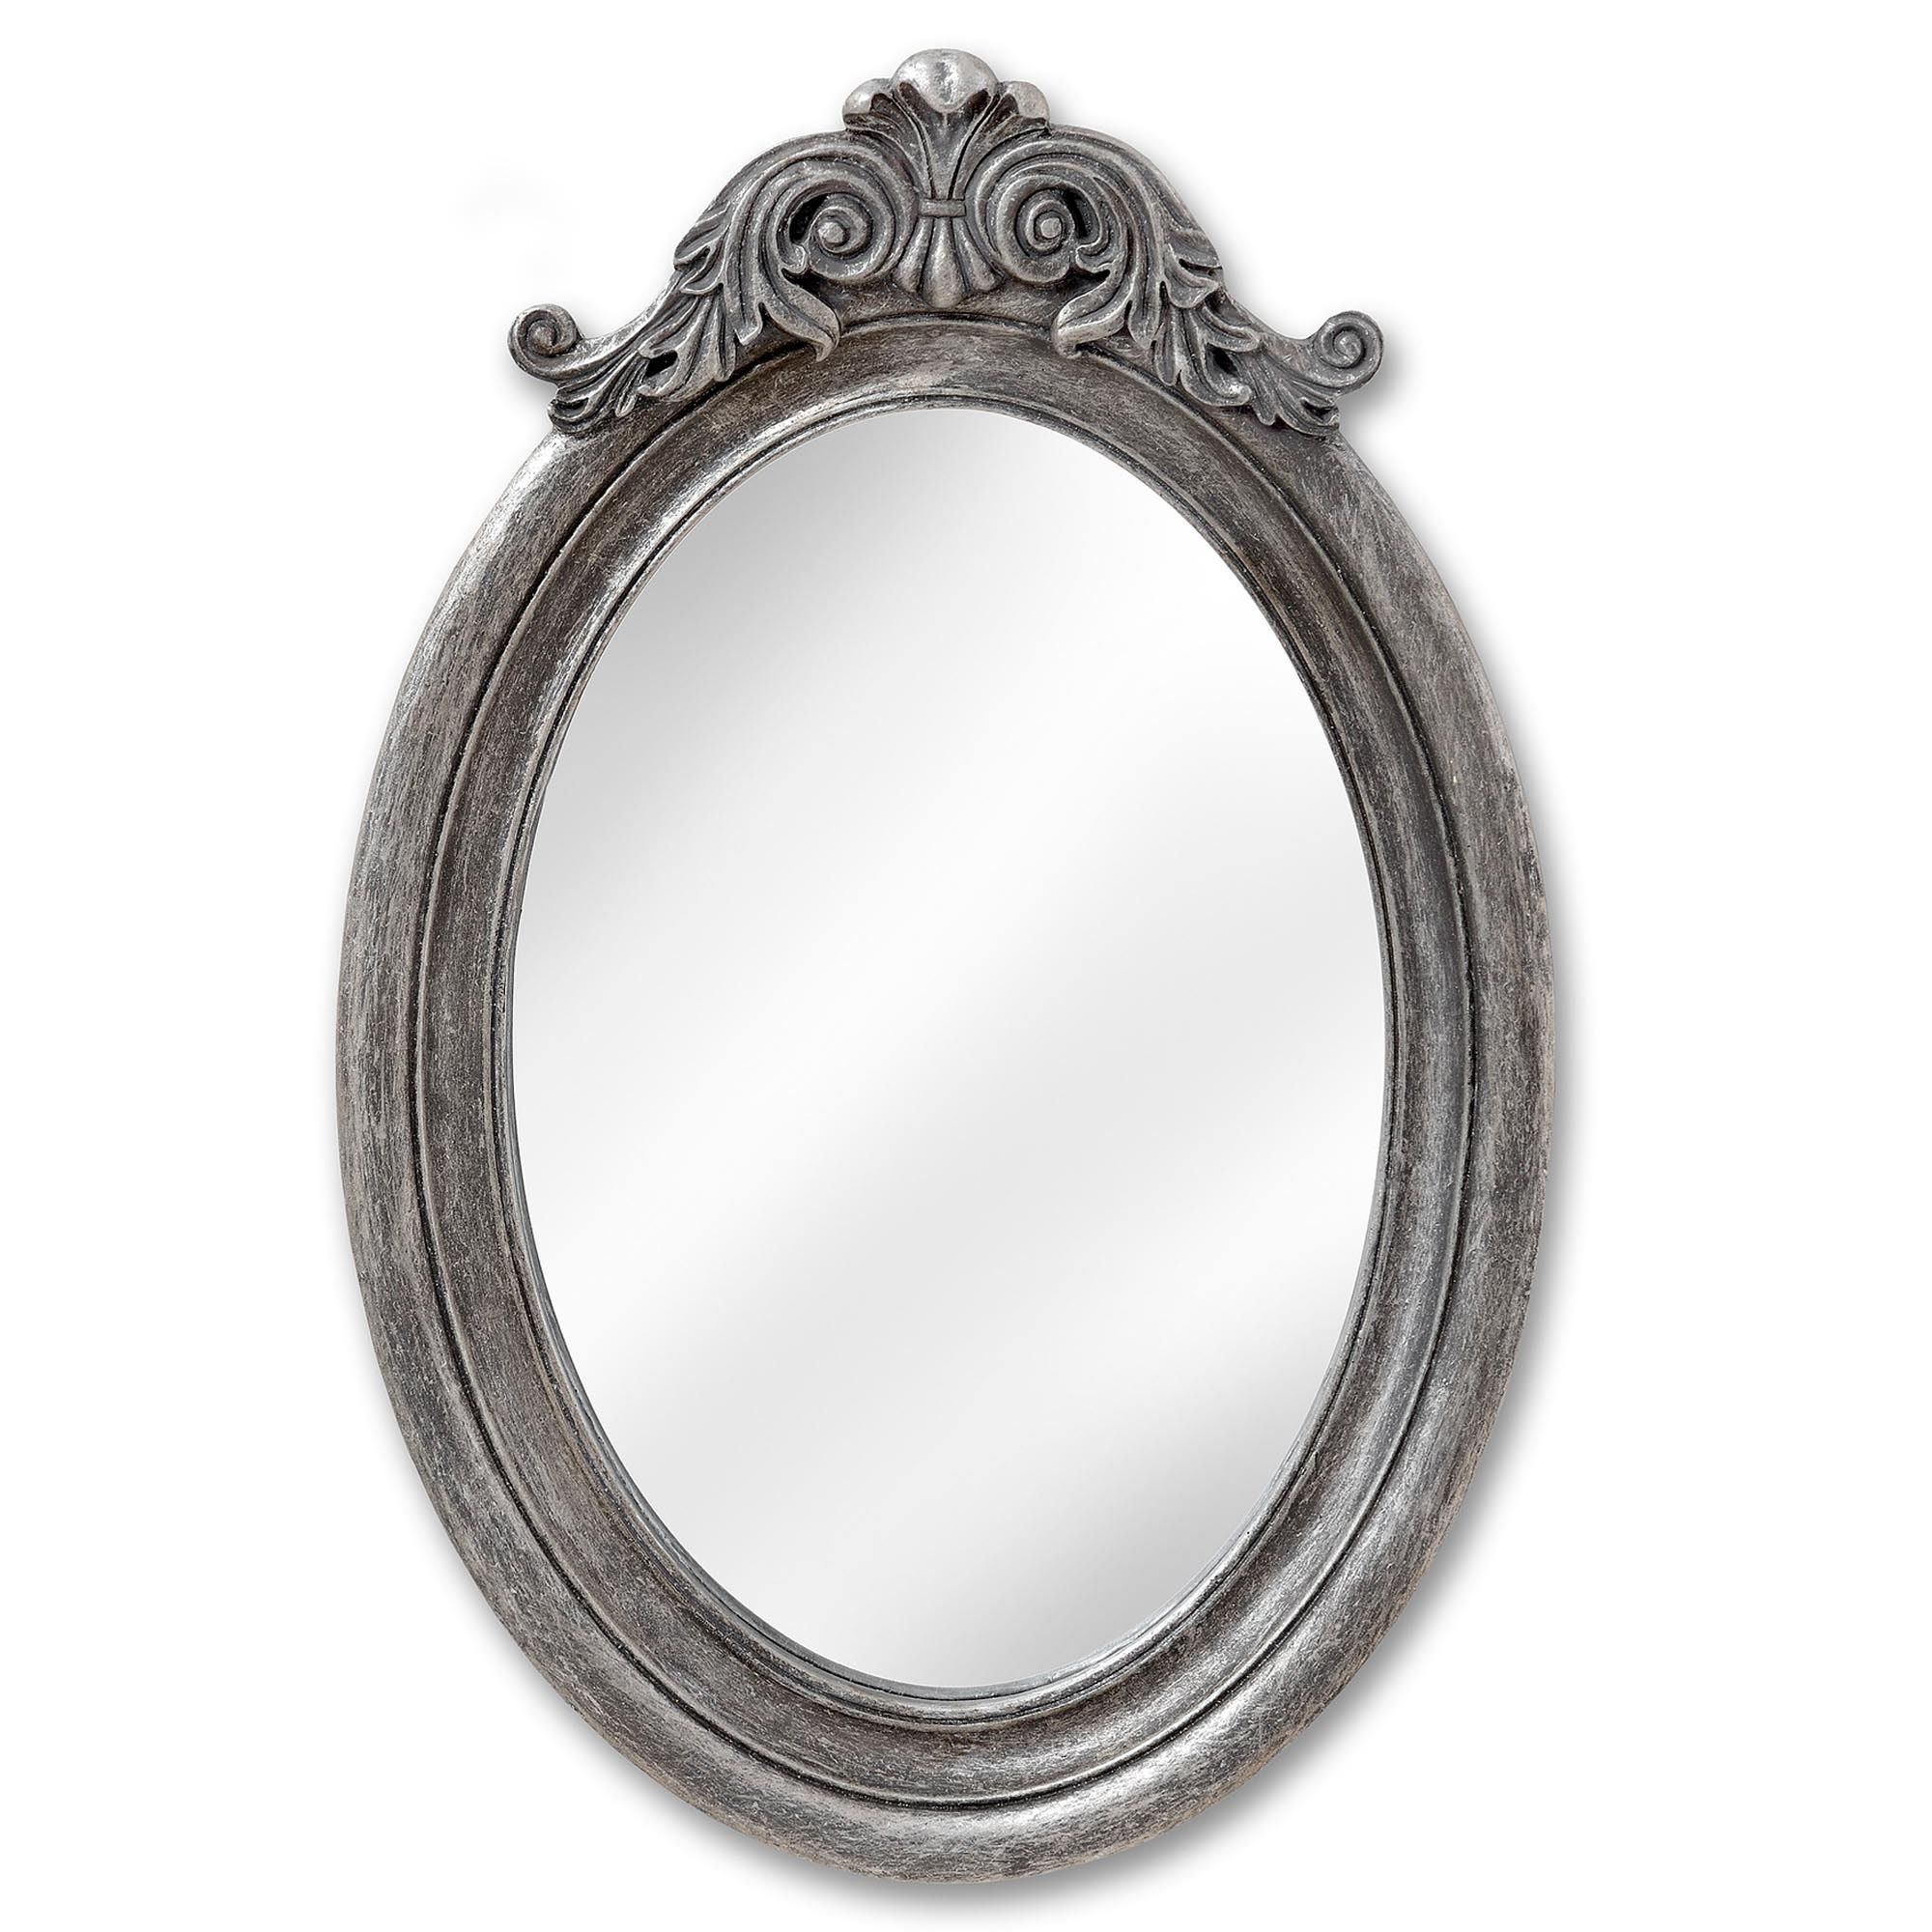 Antique French Style Silver Oval Wall Mirror | Homesdirect365 Pertaining To Antiqued Silver Quatrefoil Wall Mirrors (View 7 of 15)